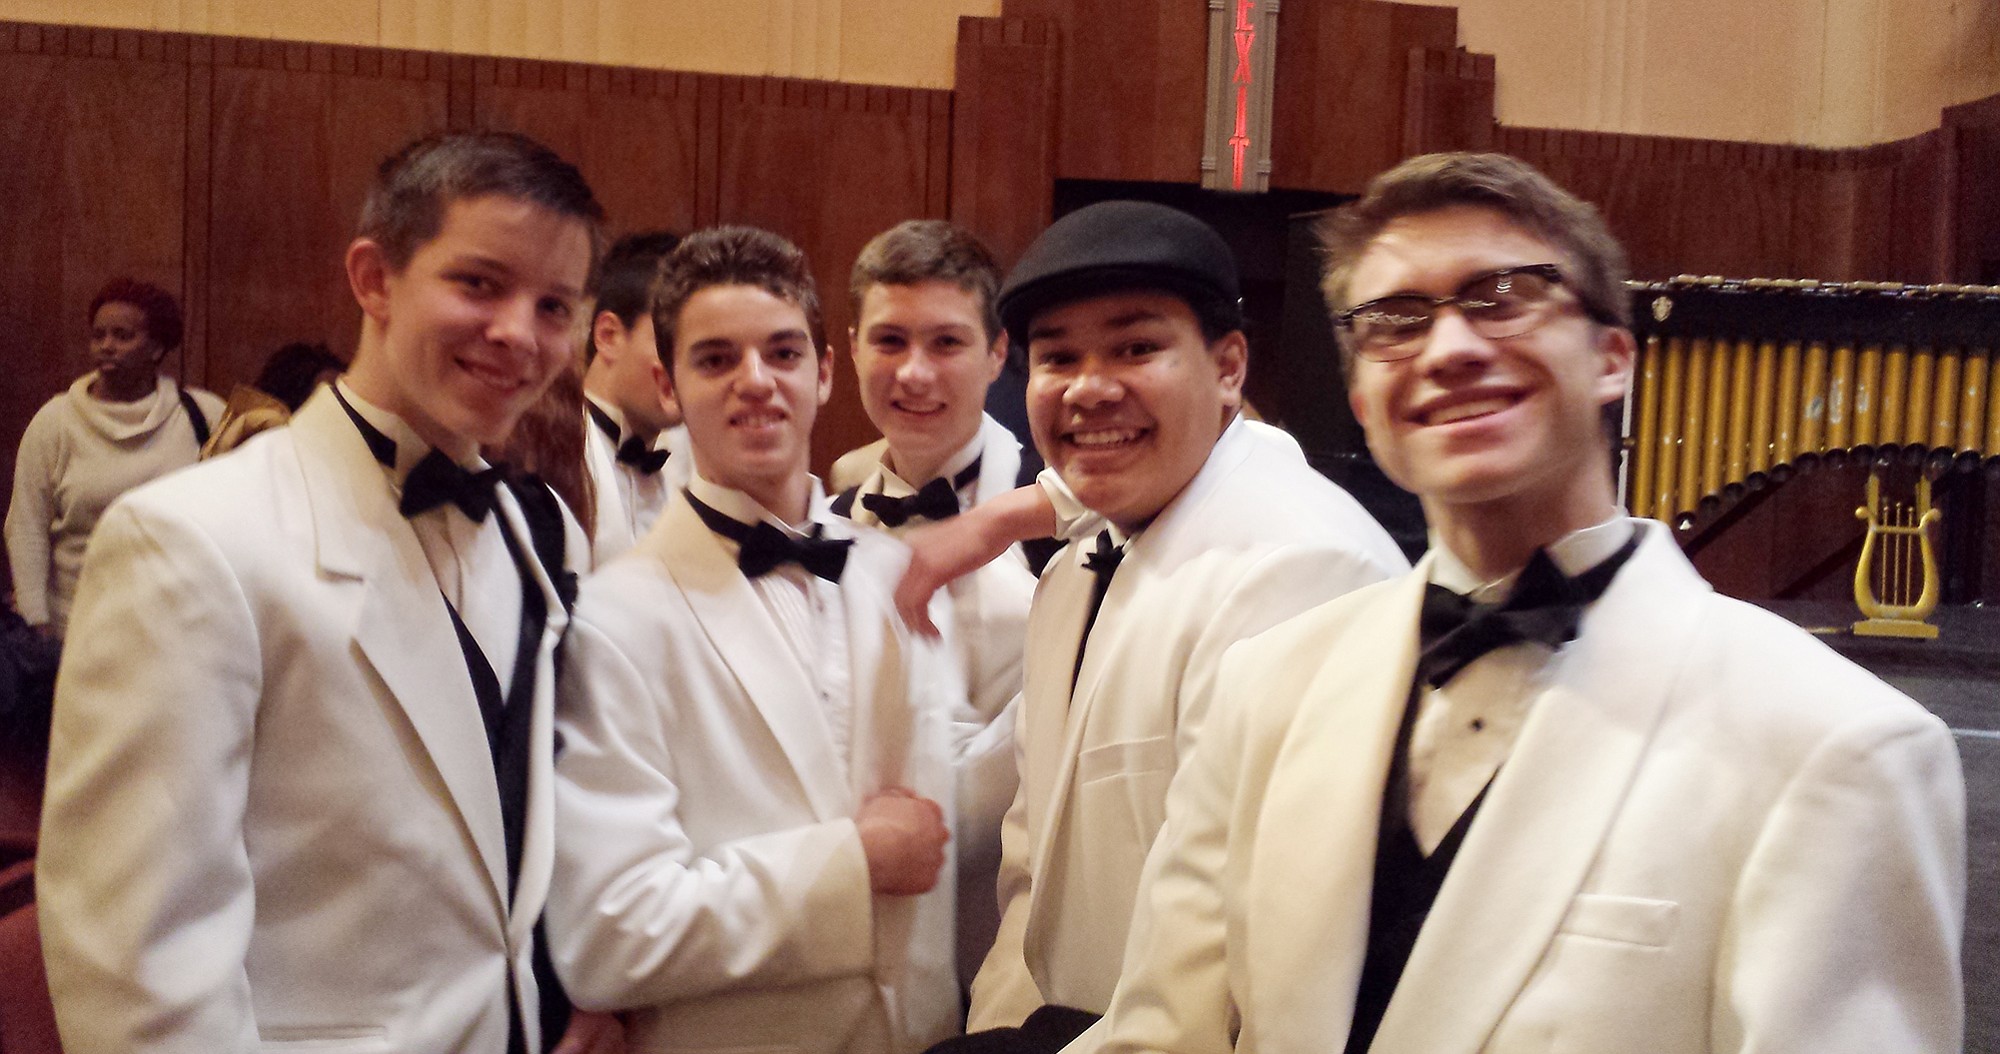 Battle Ground: Members of the Pacific Crest Jazz Orchestra, which recently won first place at both the Charles Mingus Jazz Festival in New York, and the Jazz Forward Big Band competition at Portland State University.